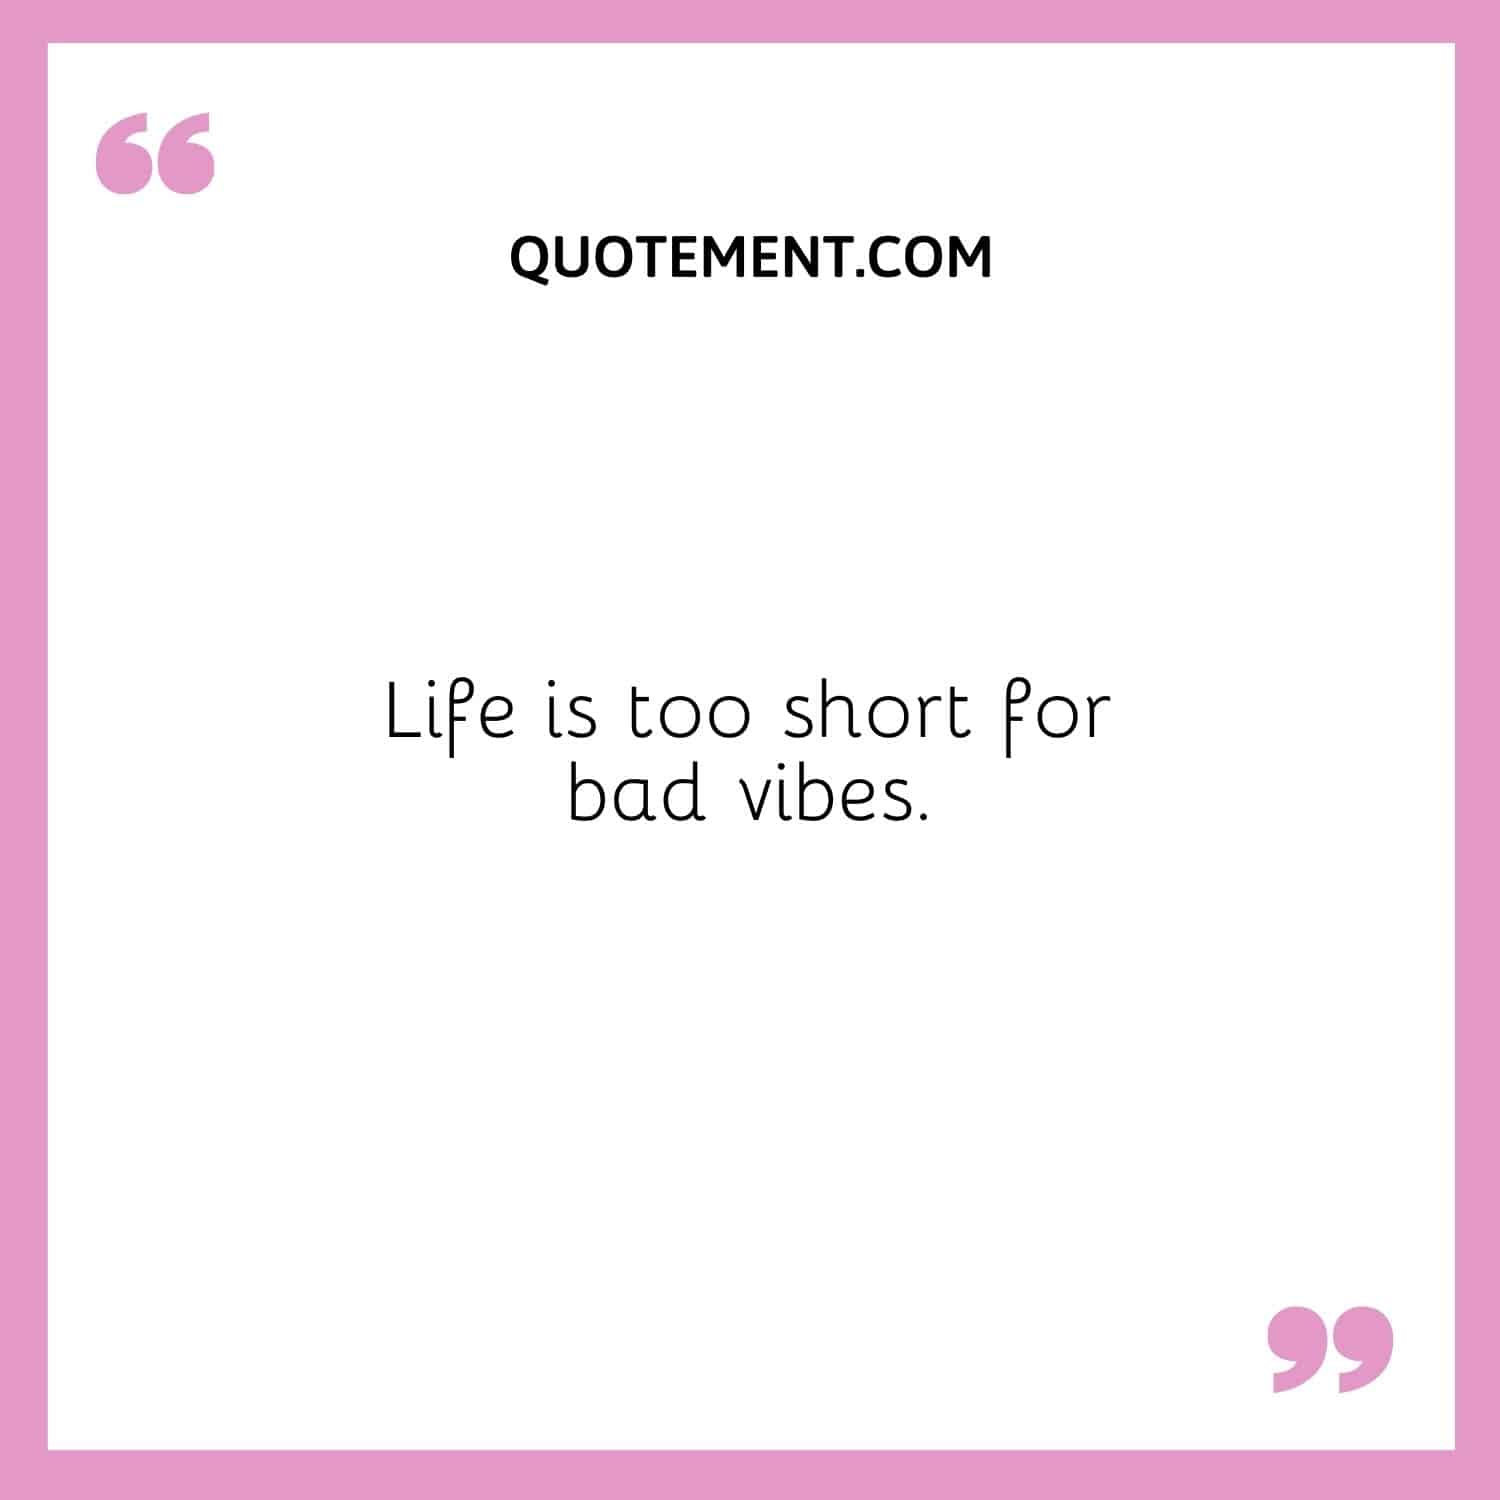 Life is too short for bad vibes.